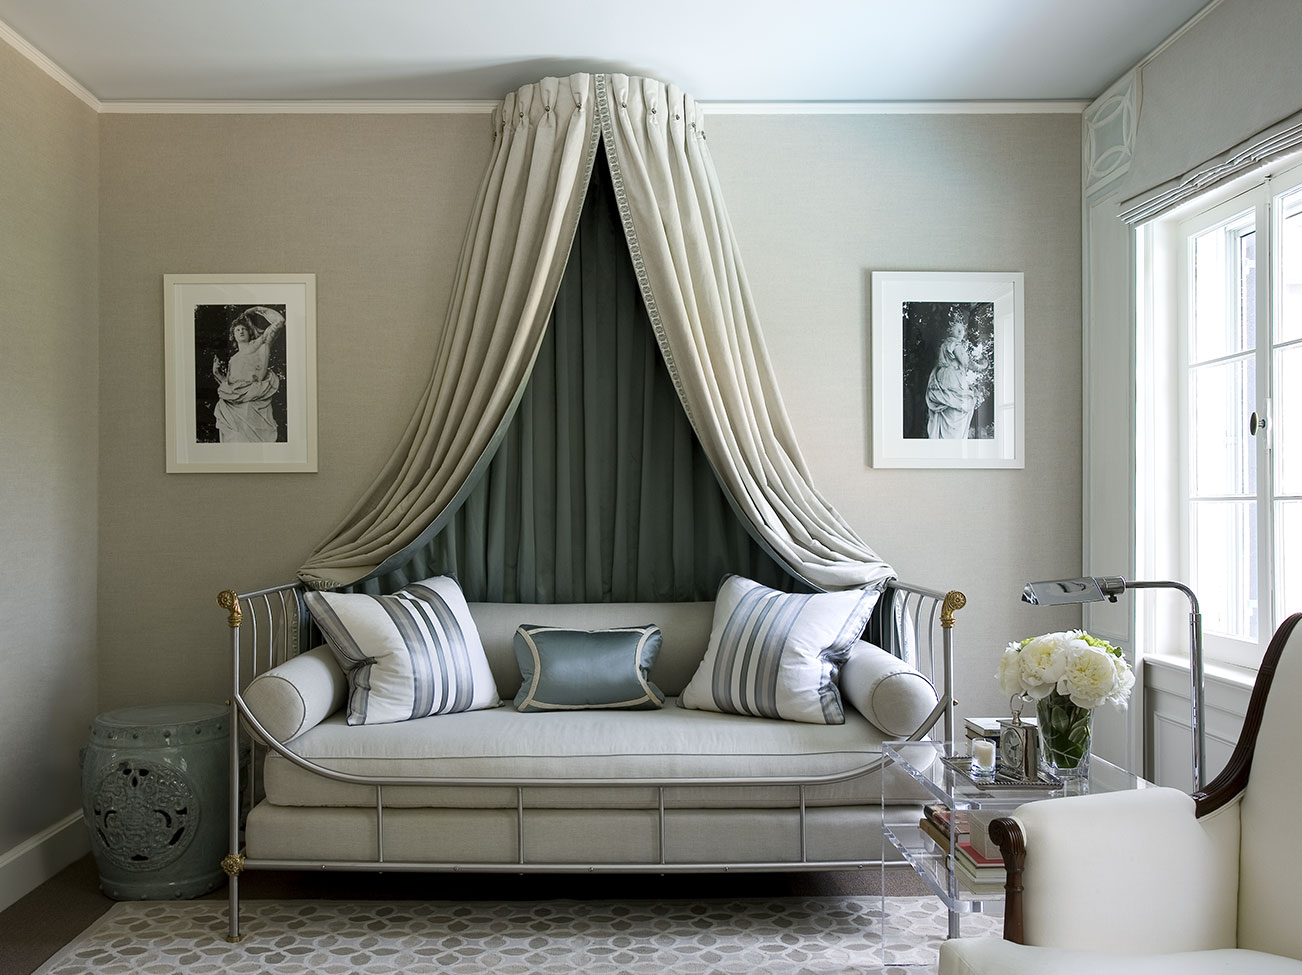 Sitting room in neutral tones with sky blue-painted ceiling, cushioned day bed with draped canopy, and striped pillows.